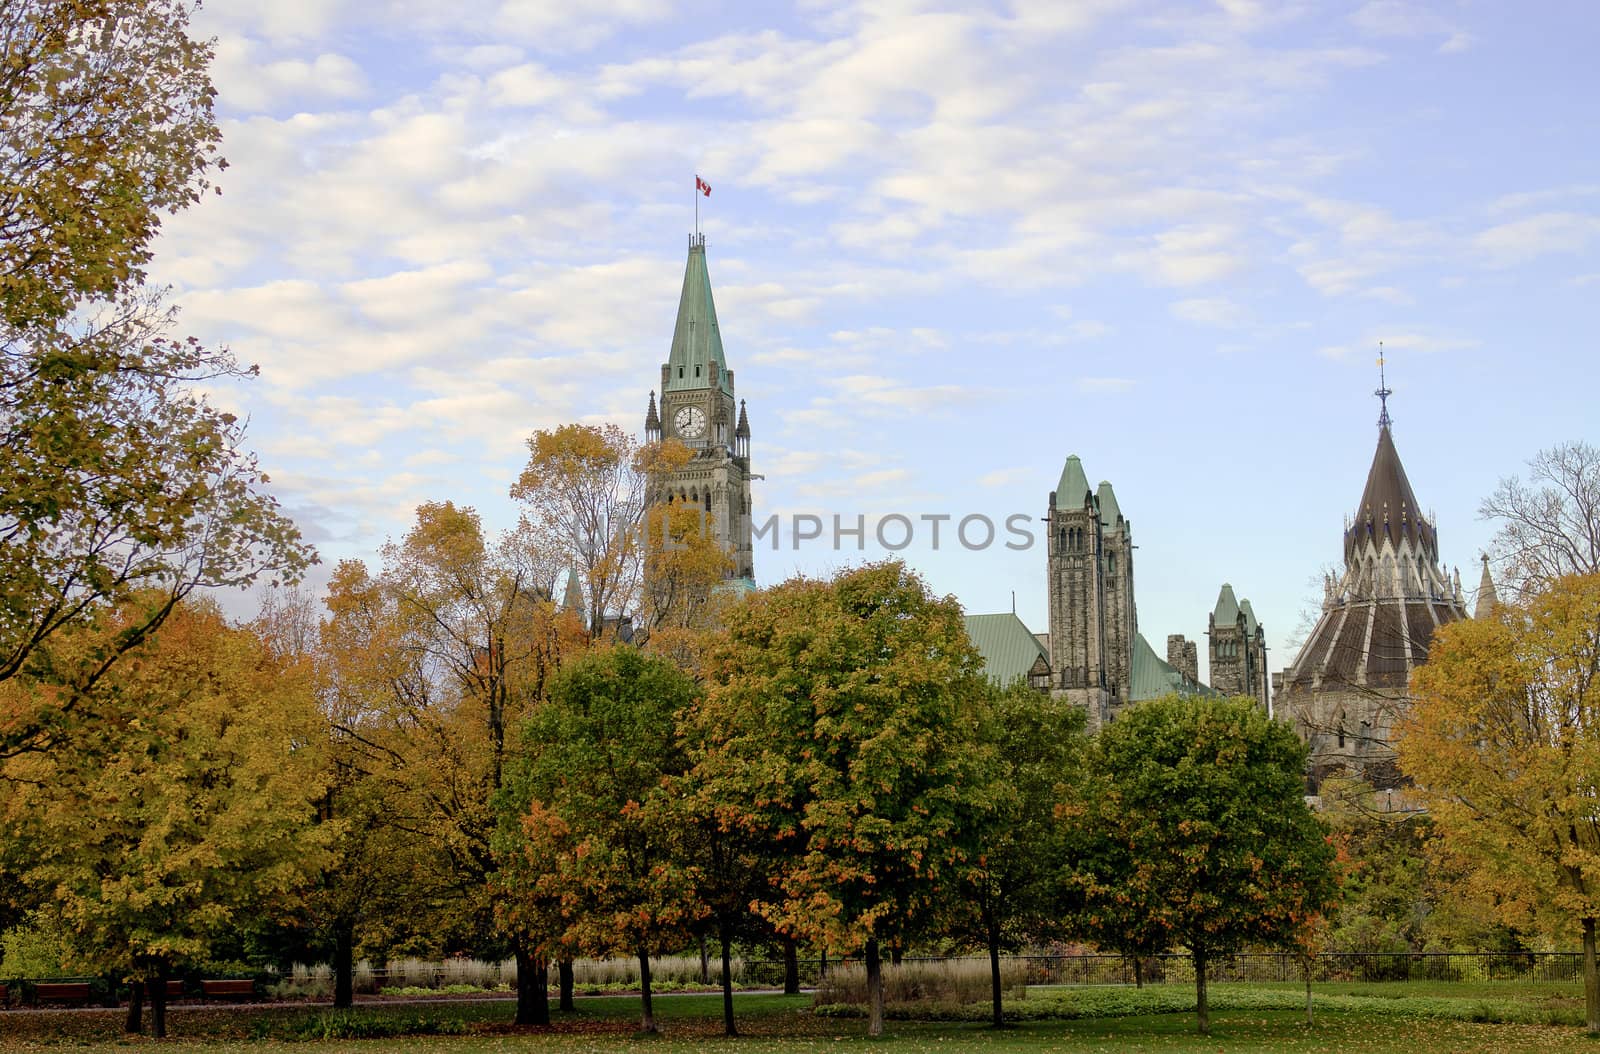 The Canadian Parliament Centre Block and Library seen from Major's Hill Park in Ottawa Canada.